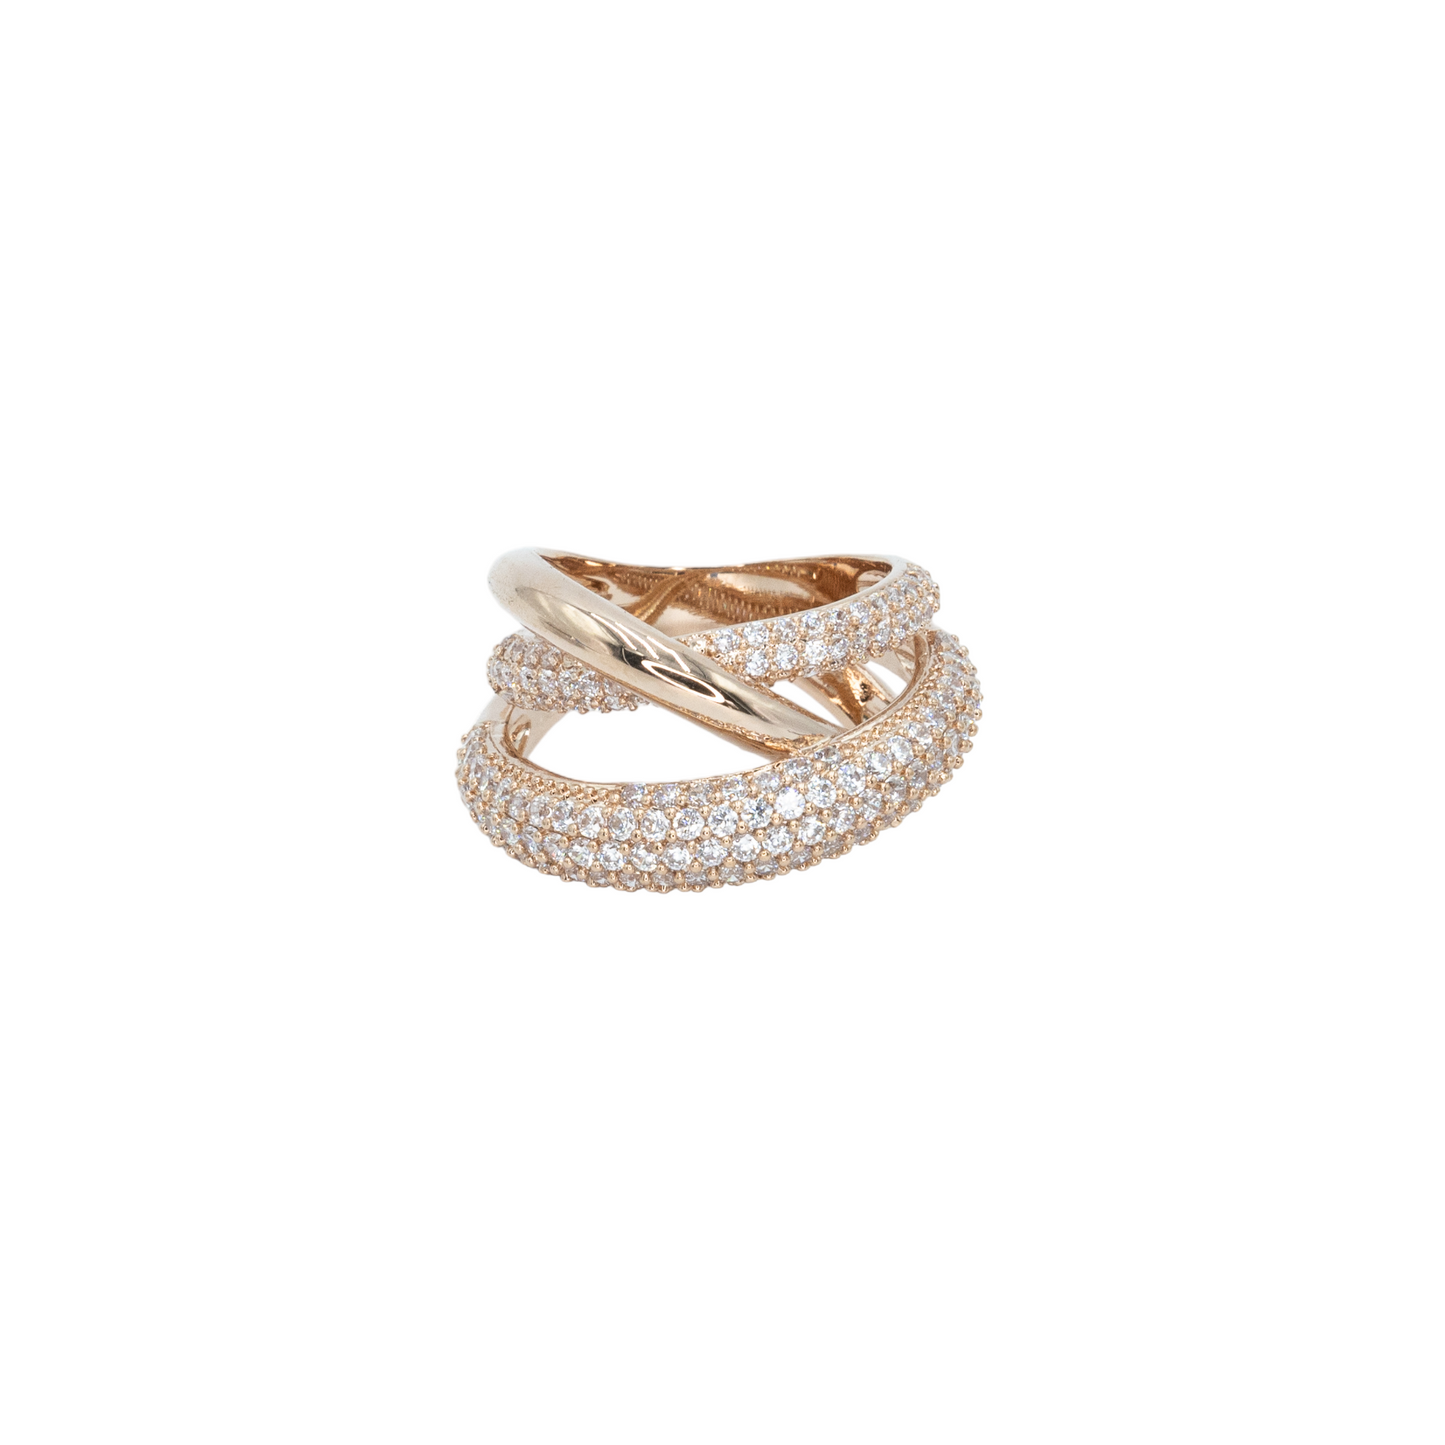 Pave triple band ring w/ 3A CZ stones rhodium RG plated